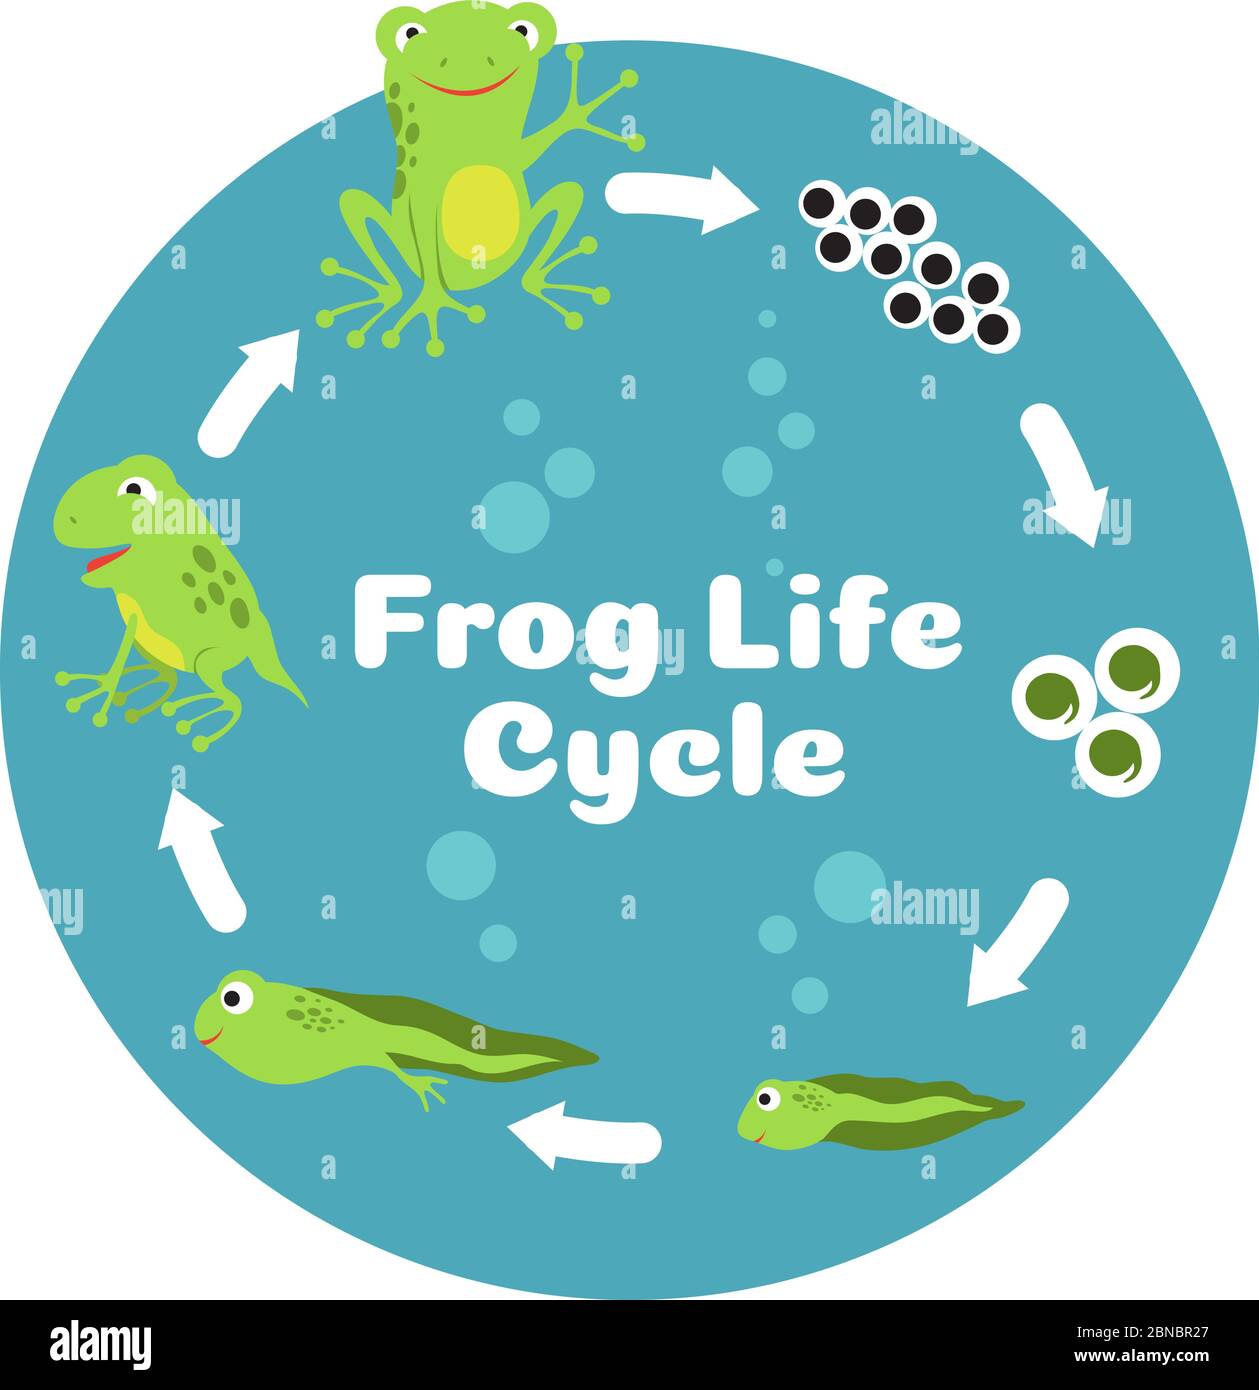 Frog life cycle. From eggs to tadpole and adult frog. Kids biology educational vector illustration. Cycle amphibian biology, animal toad growth Stock Vector